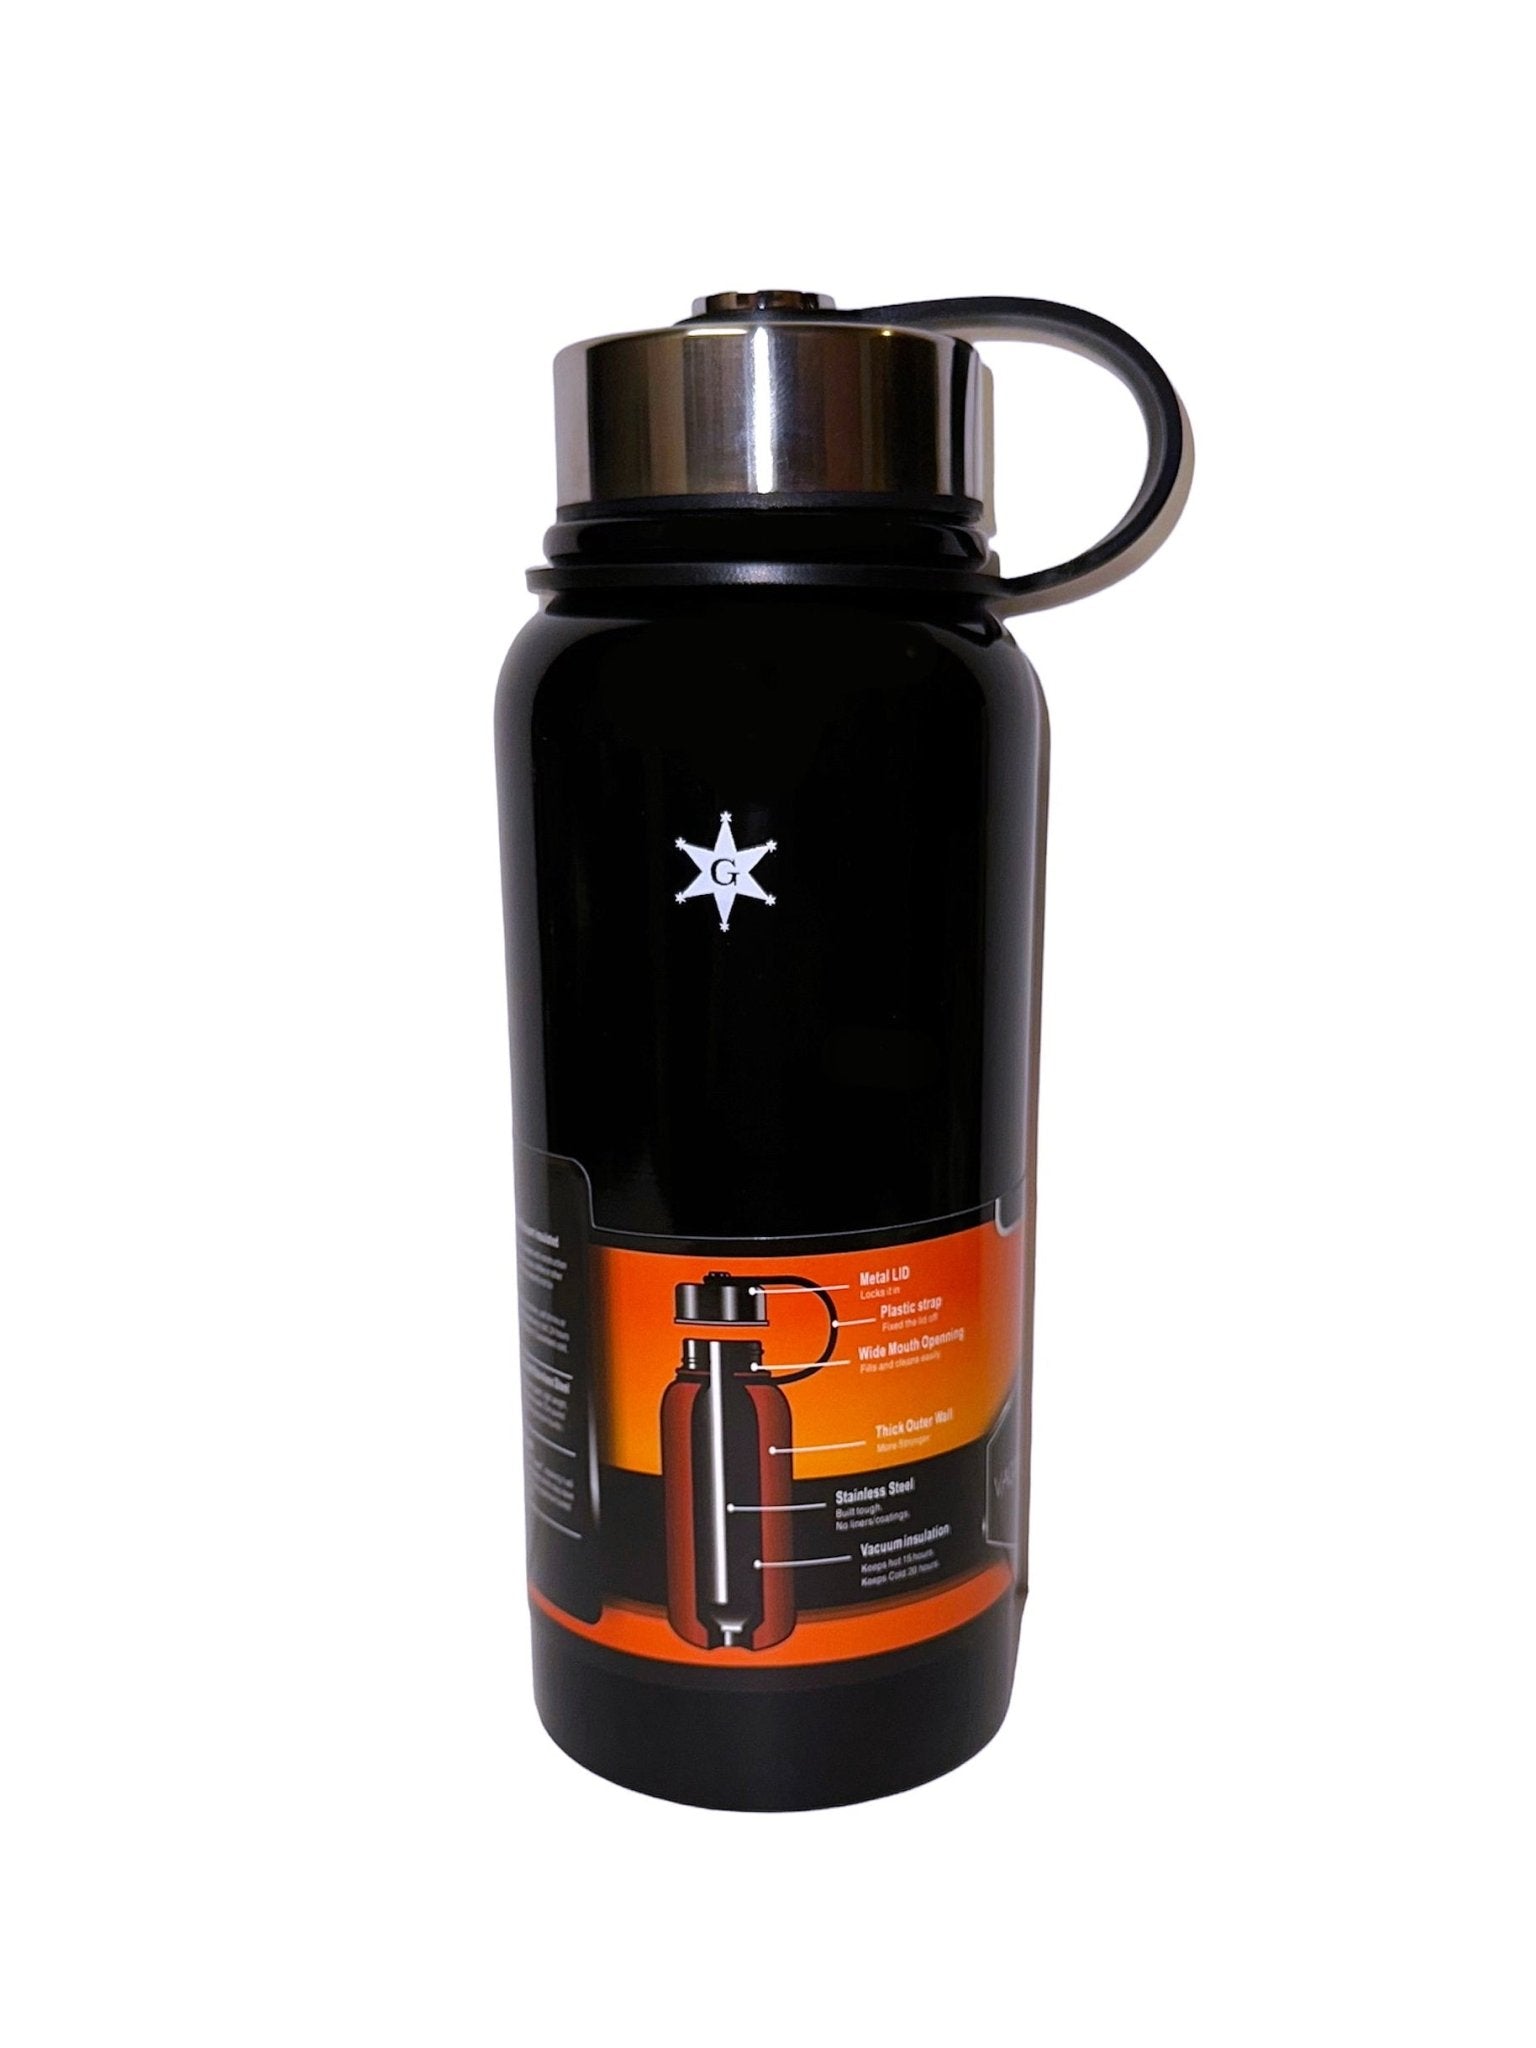 Insulated Food Soup Thermos Flask wide mouth comes with utensils